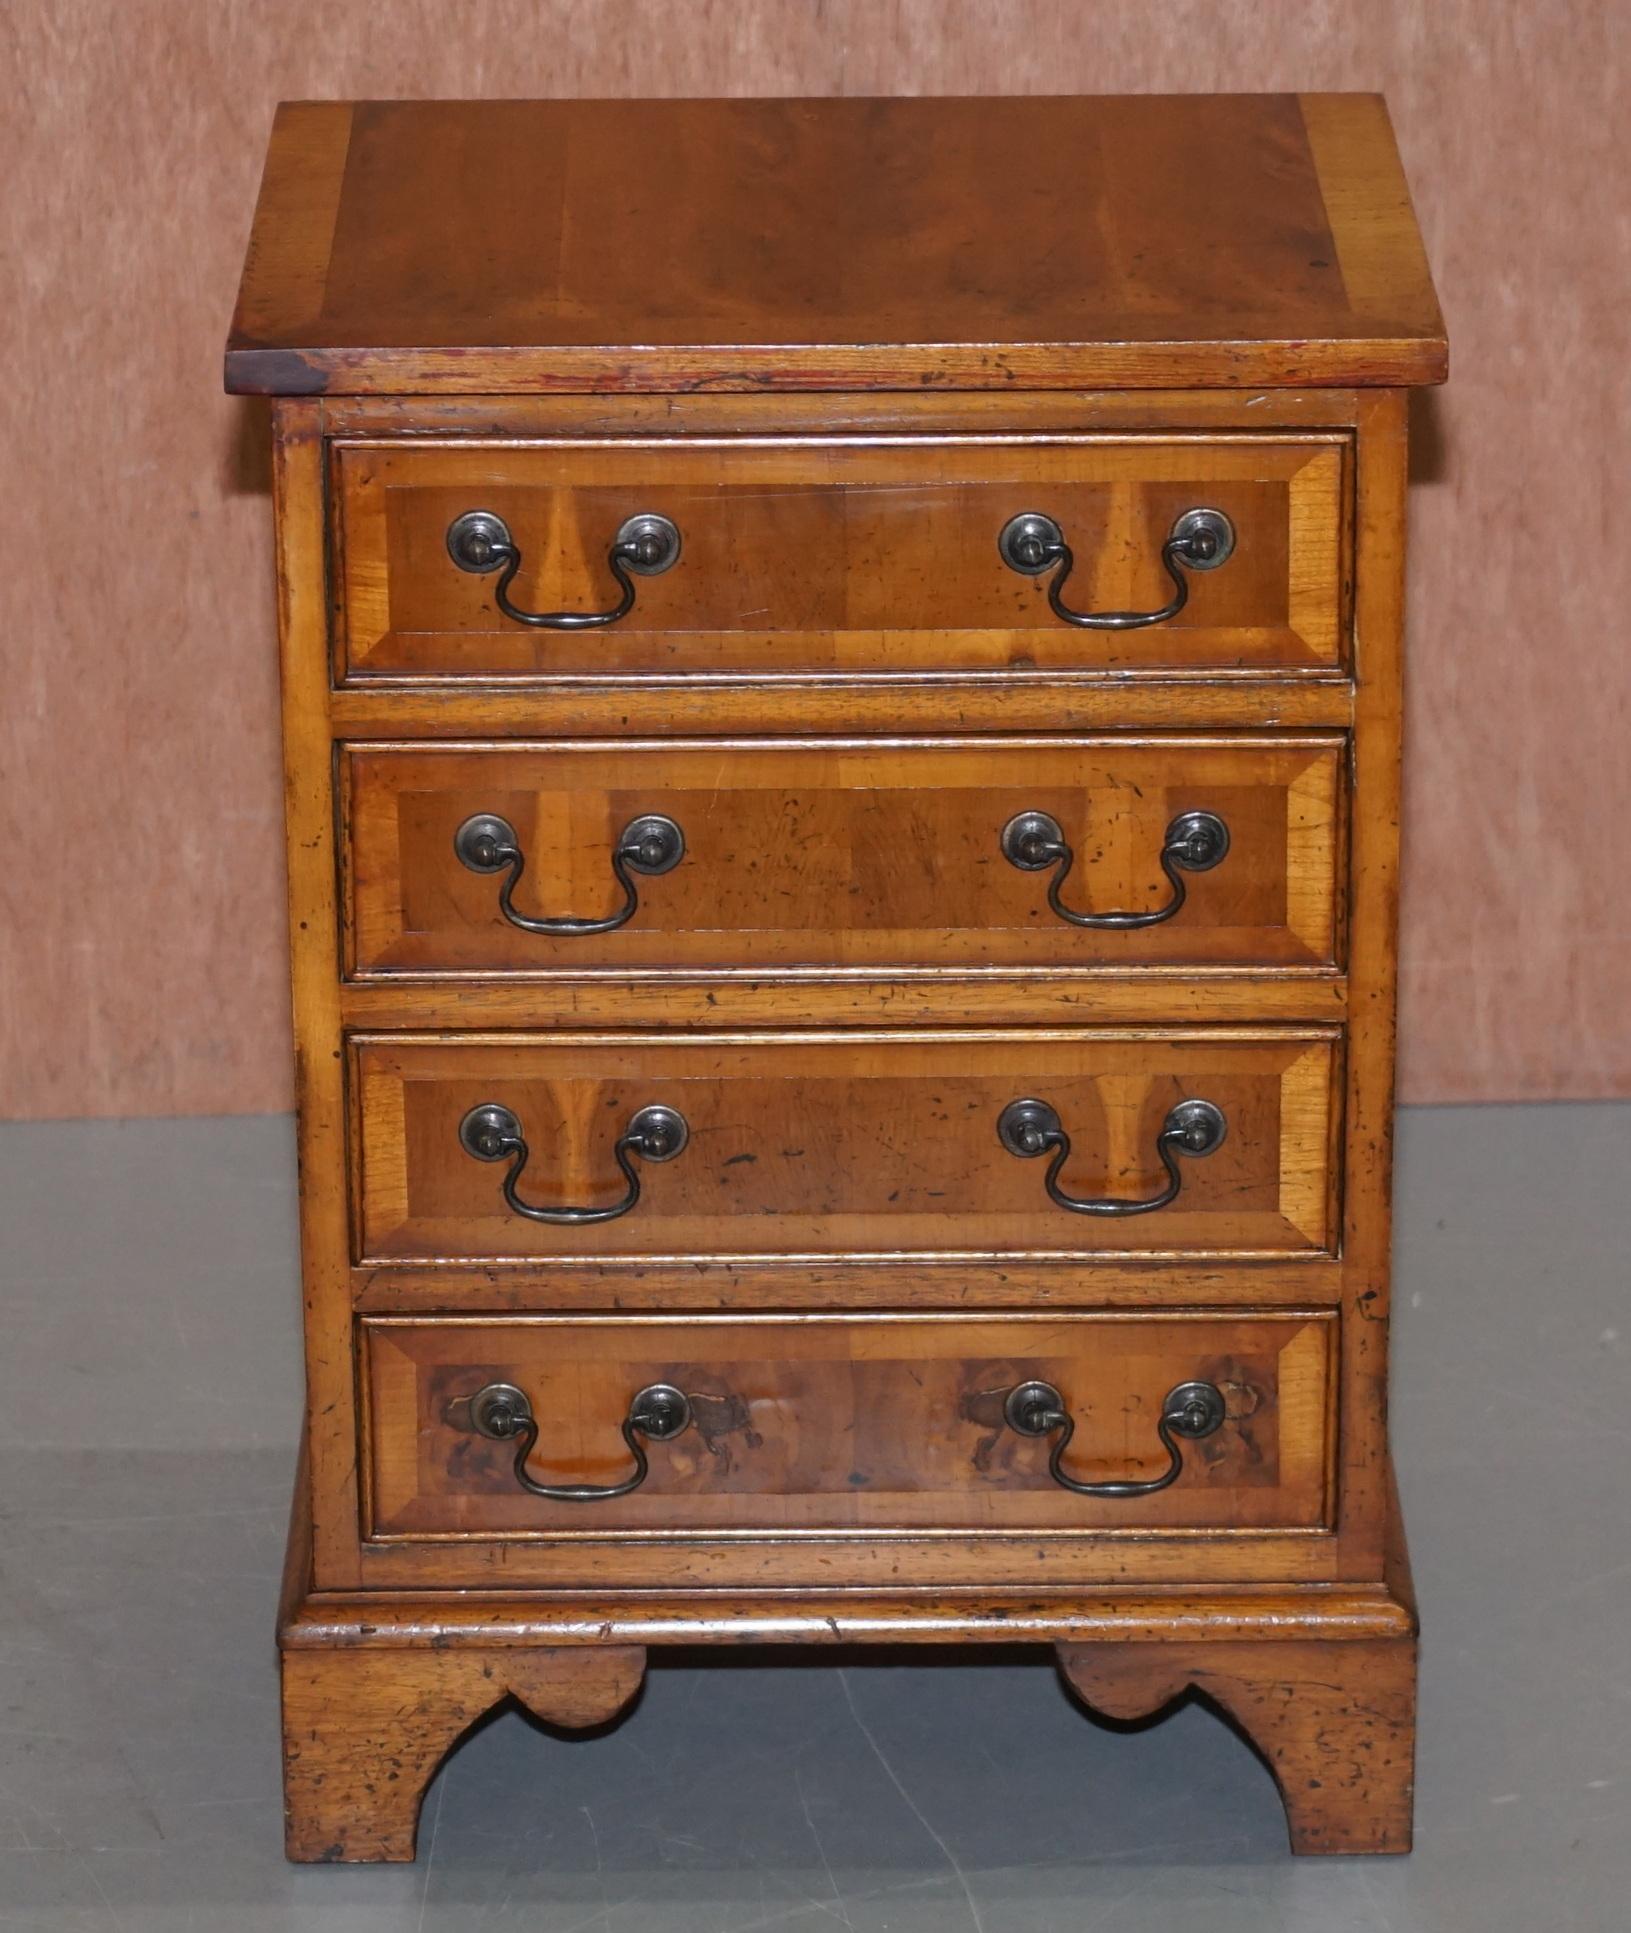 We are delighted to offer for sale this very nice vintage burr yew small chest of drawers made in the Georgian style

A good looking and well made piece, its very versatile, I see it being used as a luxury lamp or wine table but naturally it could